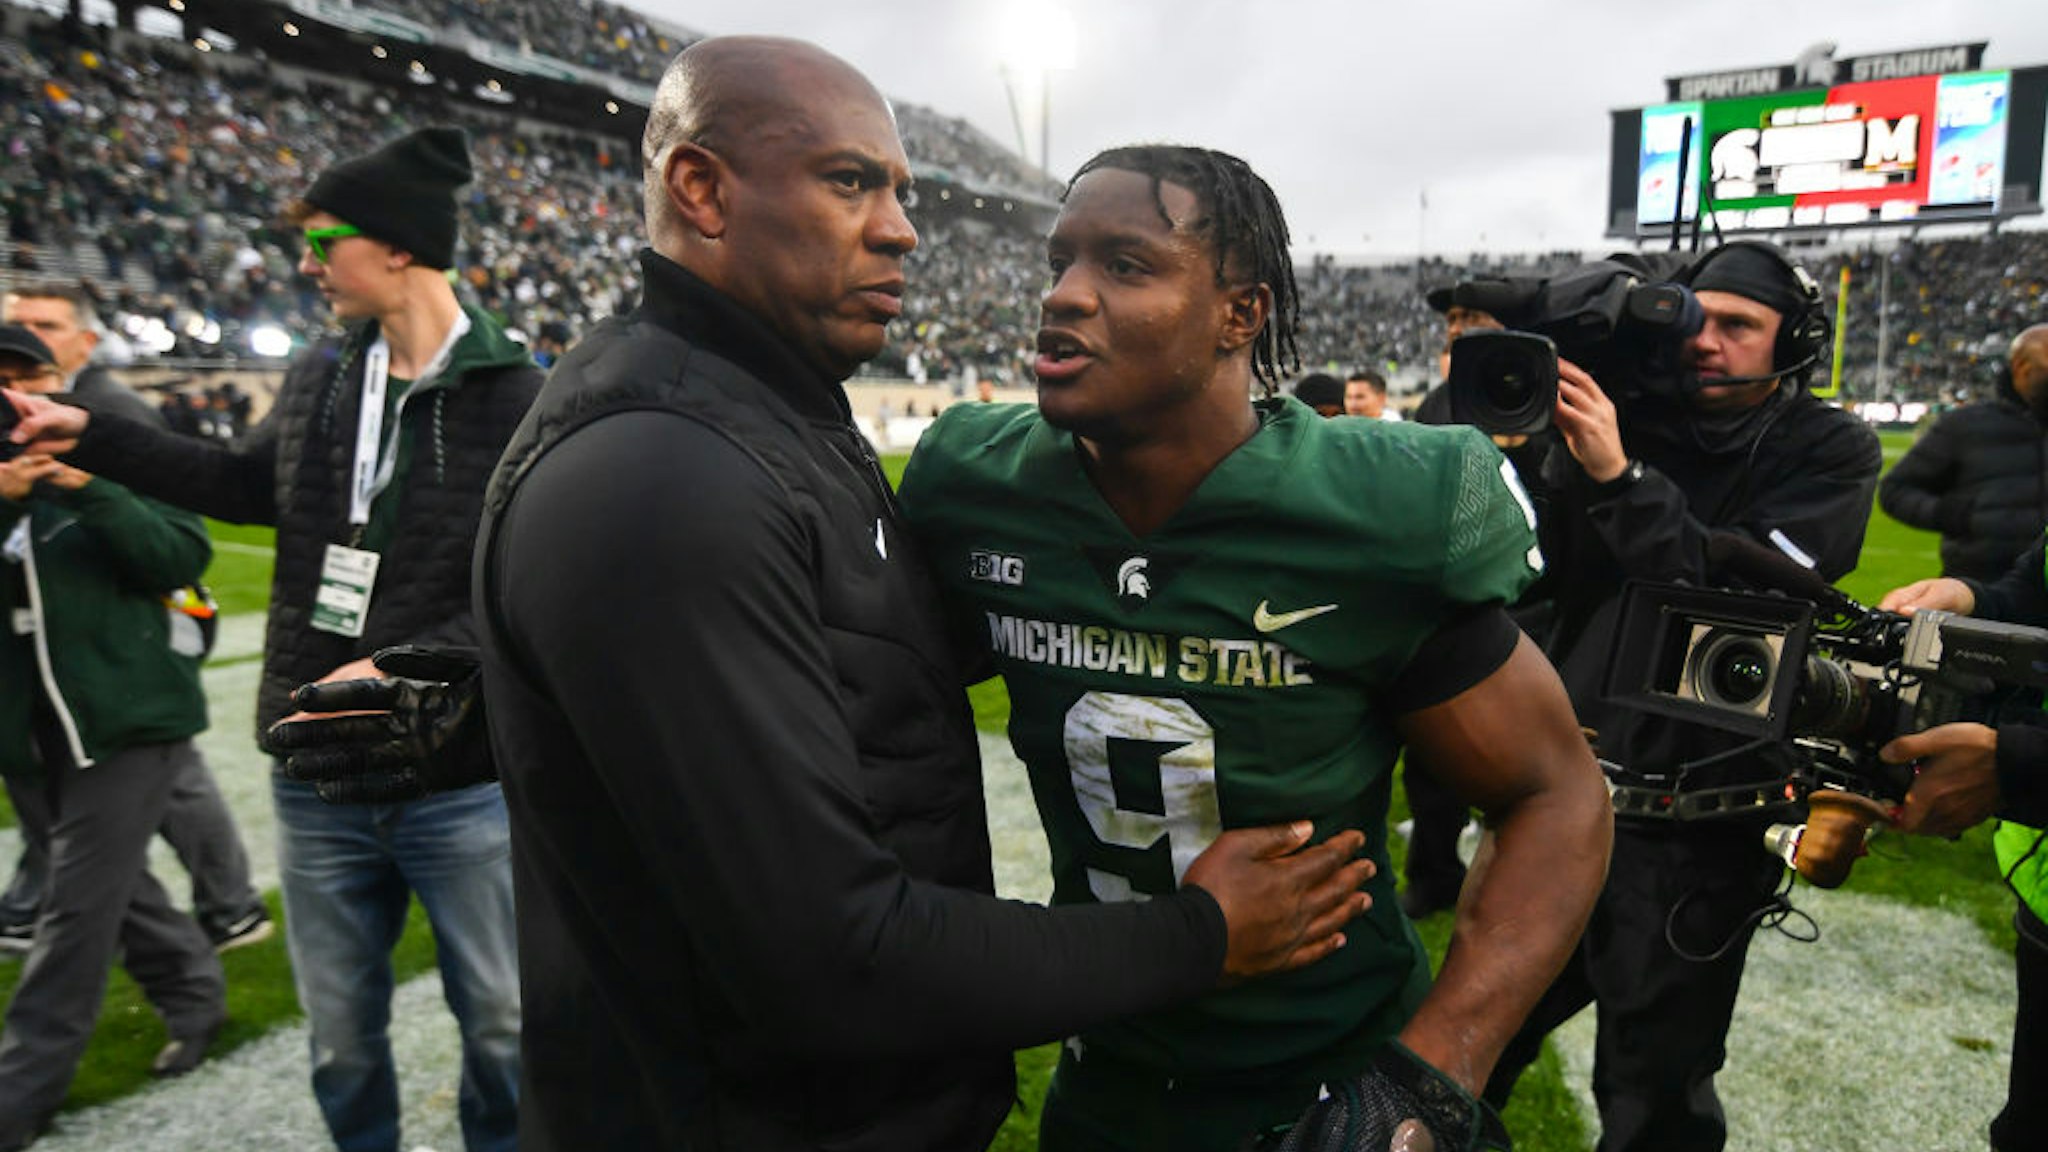 EAST LANSING, MI - OCTOBER 30: Michigan State Spartans head coach Mel Tucker congratulates running back Kenneth Walker III (9) following a college football game between the Michigan State Spartans and the Michigan Wolverines on October 30, 2021 at Spartan Stadium in East Lansing, MI. (Photo by Adam Ruff/Icon Sportswire via Getty Images)